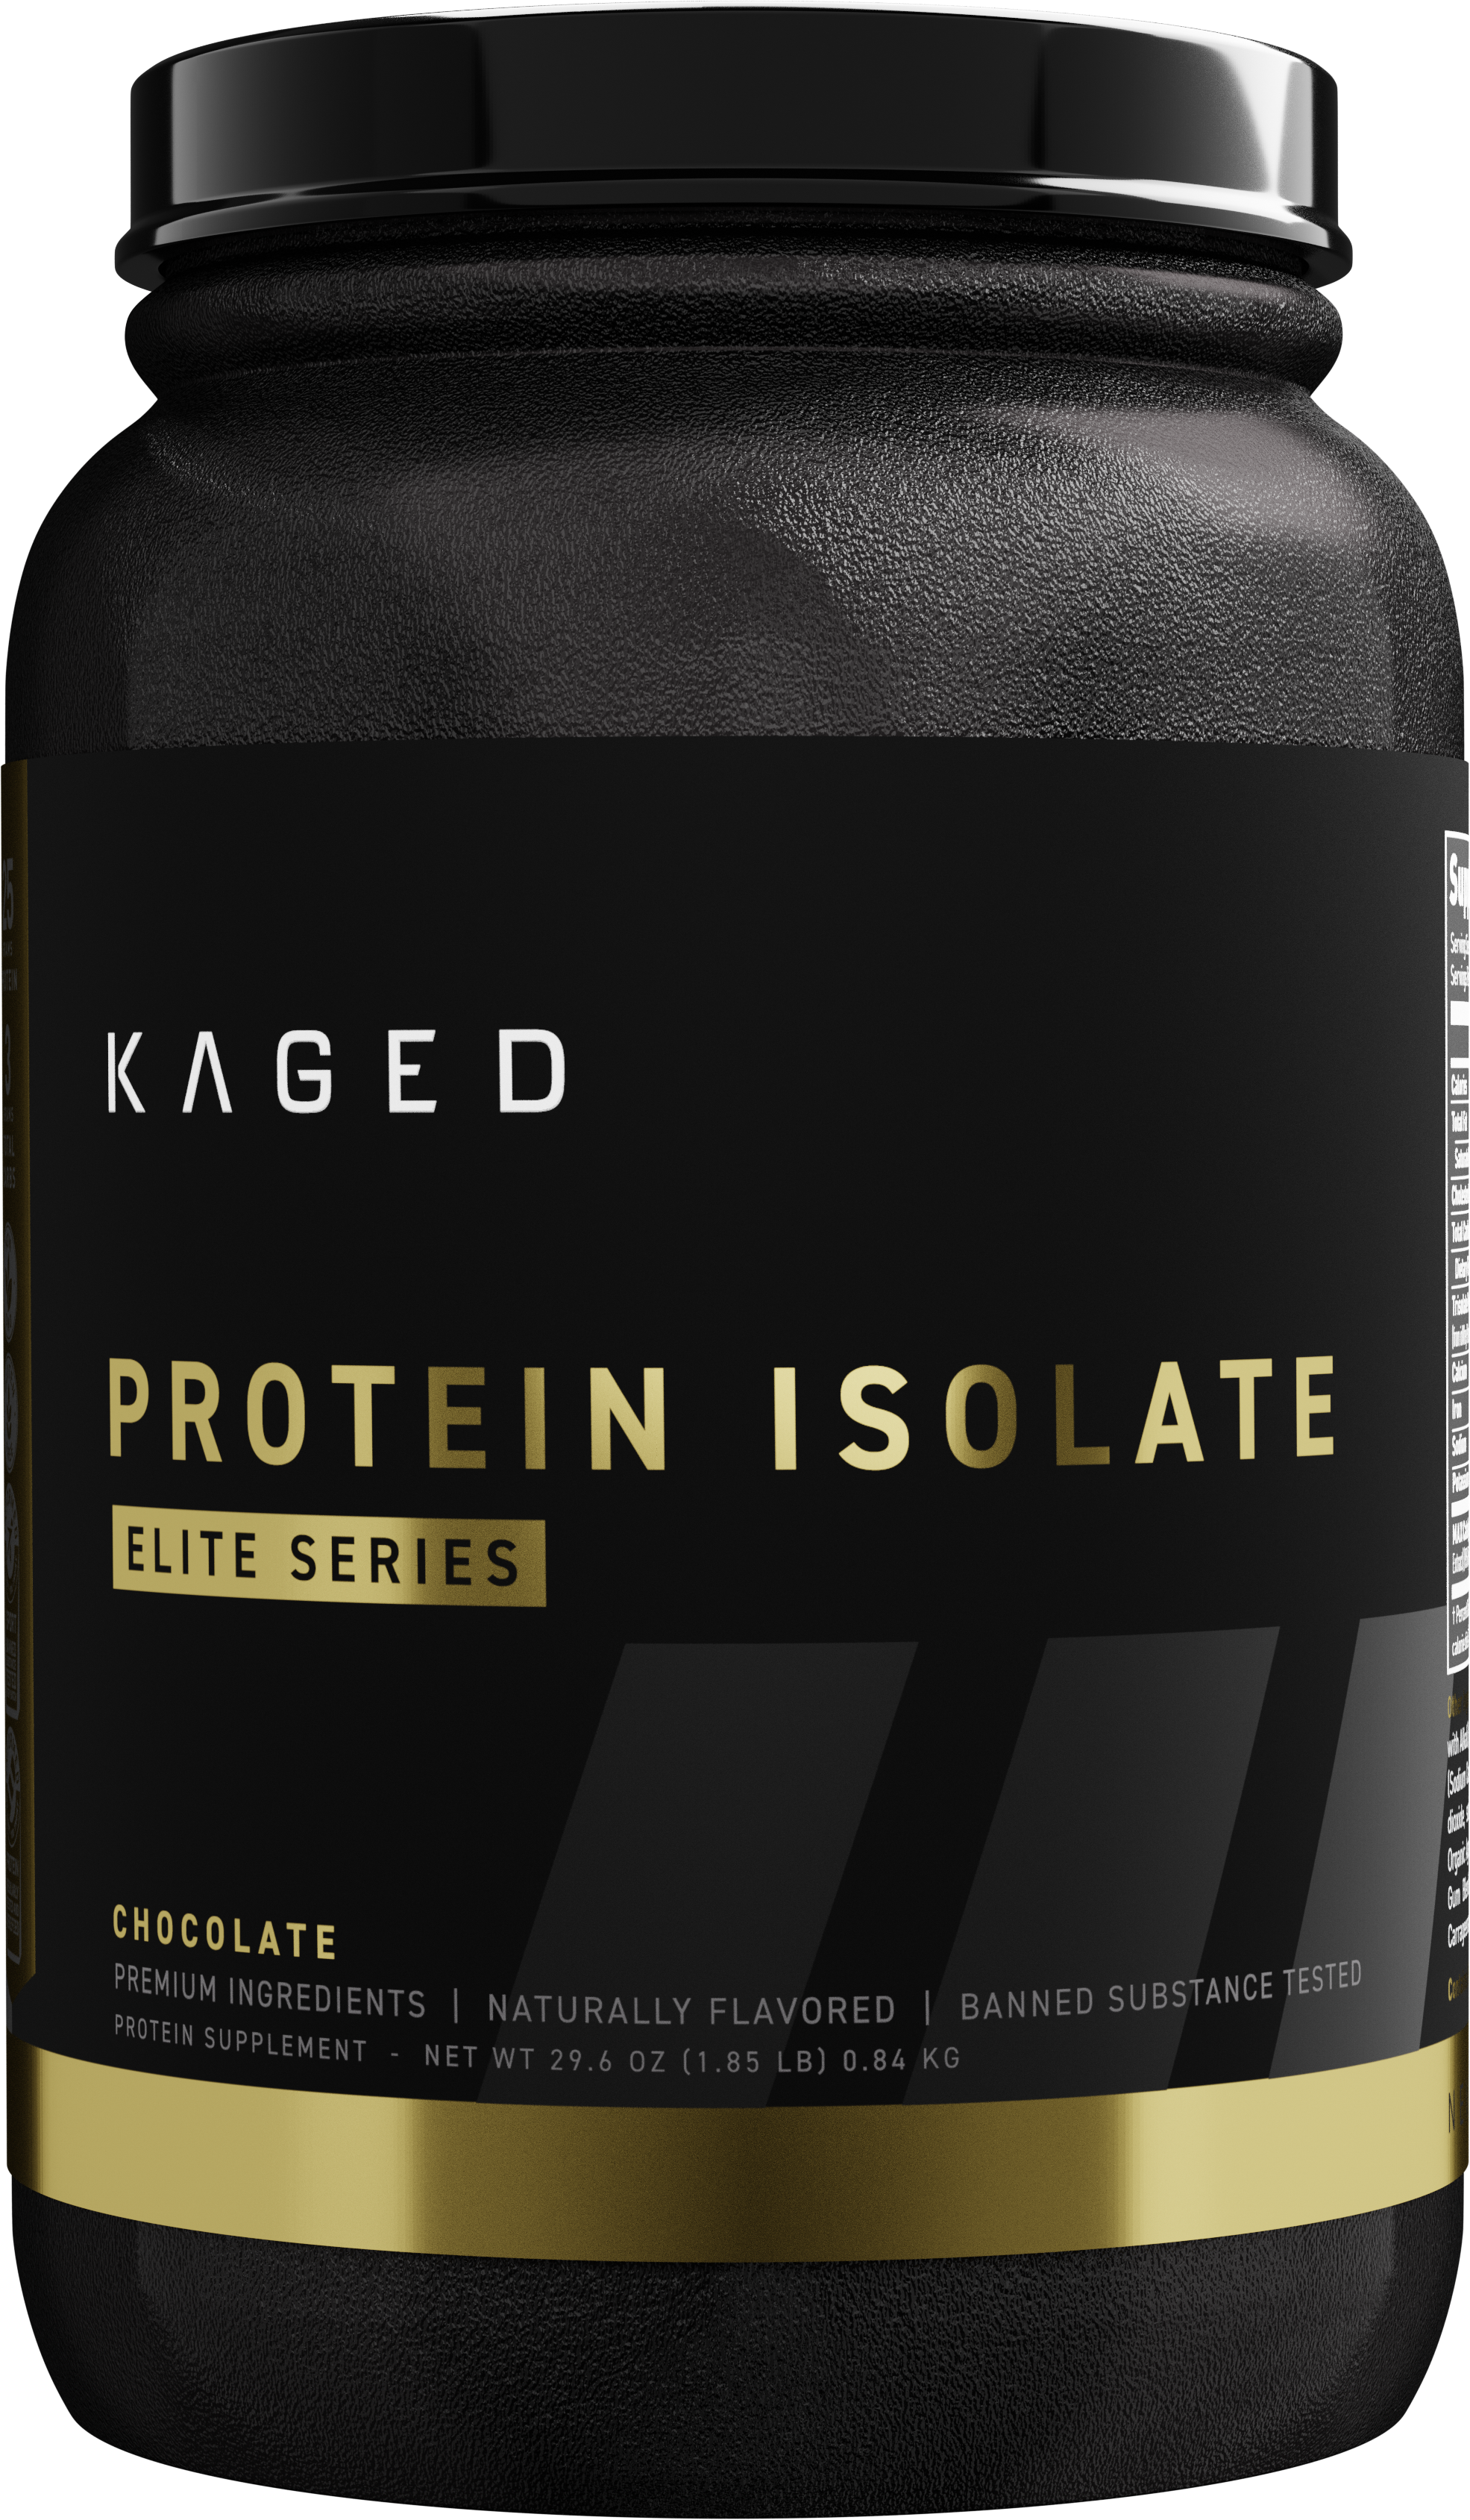 Kaged Protein Isolate